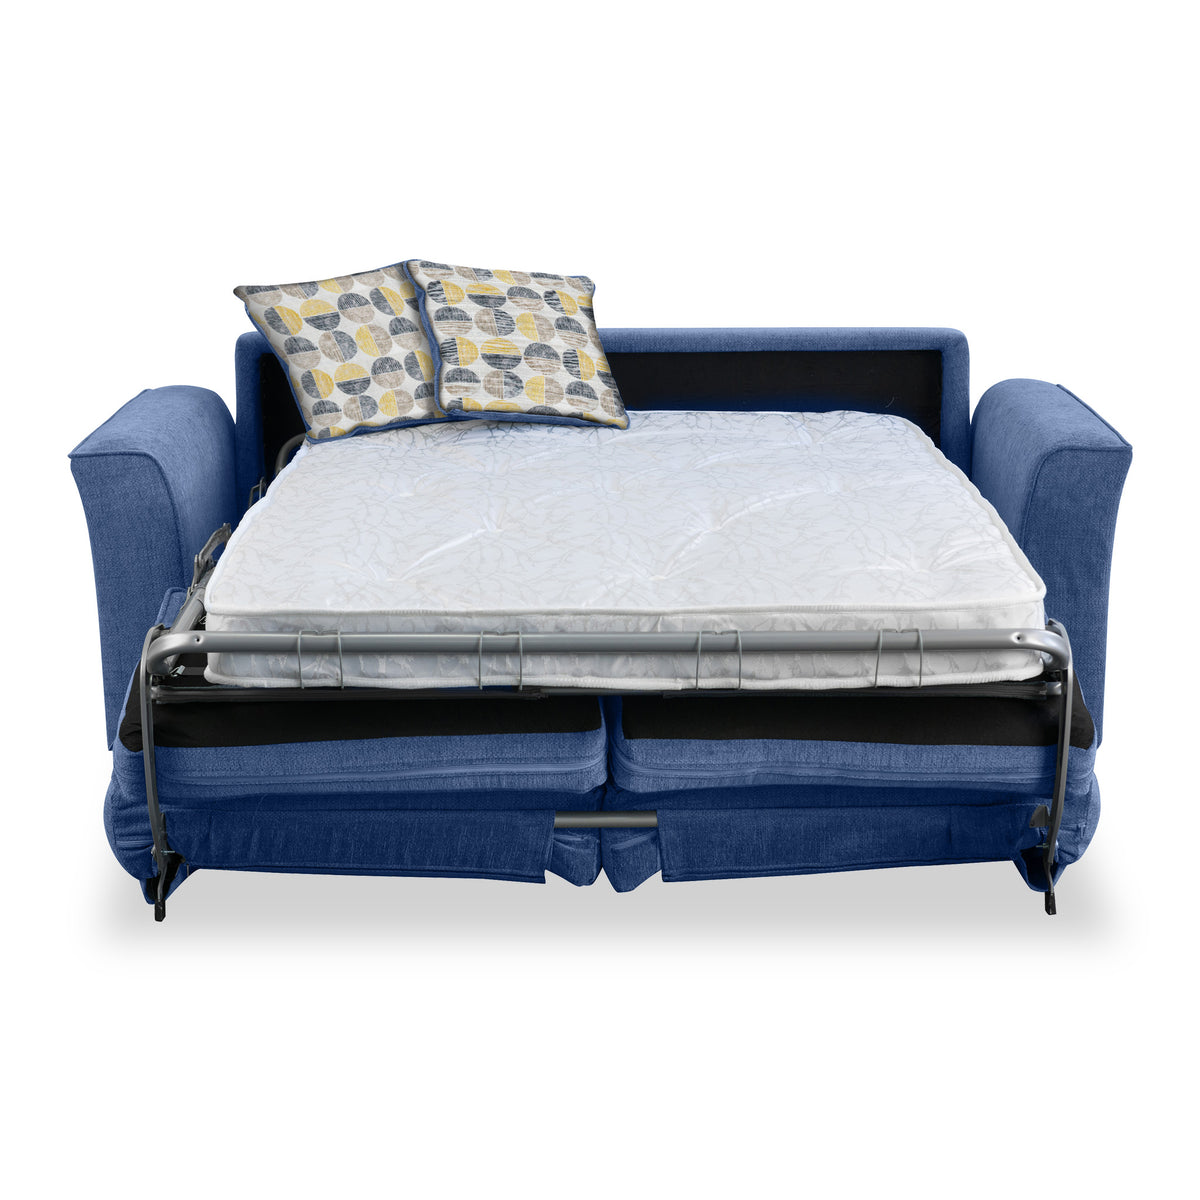 Abbott 2 Seater Sofabed in Denim with Rufus Beige Cushions by Roseland Furniture